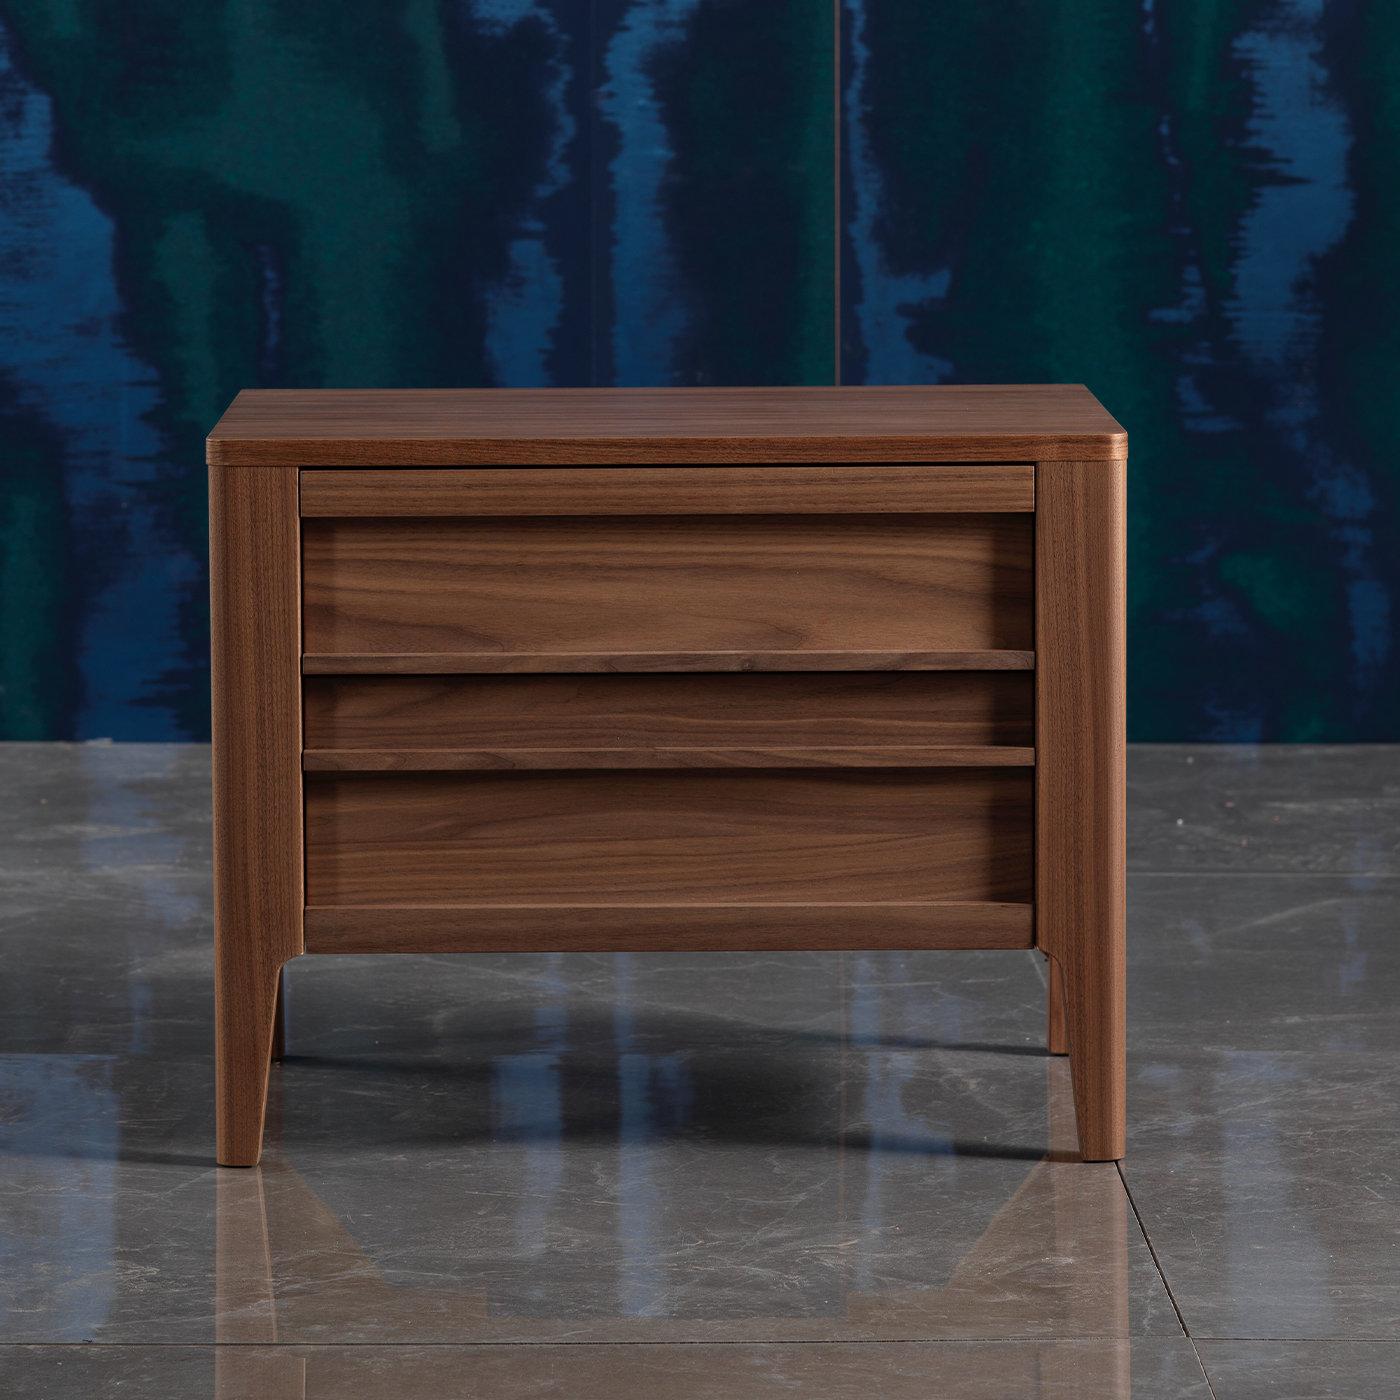 This walnut wood nightstand is sleek and elegant while practical, and is perfect to be set on either side of a bed for added elegance and practicality in any bedroom. This nightstand rests on slim wooden legs and boasts two drawers that have wooden